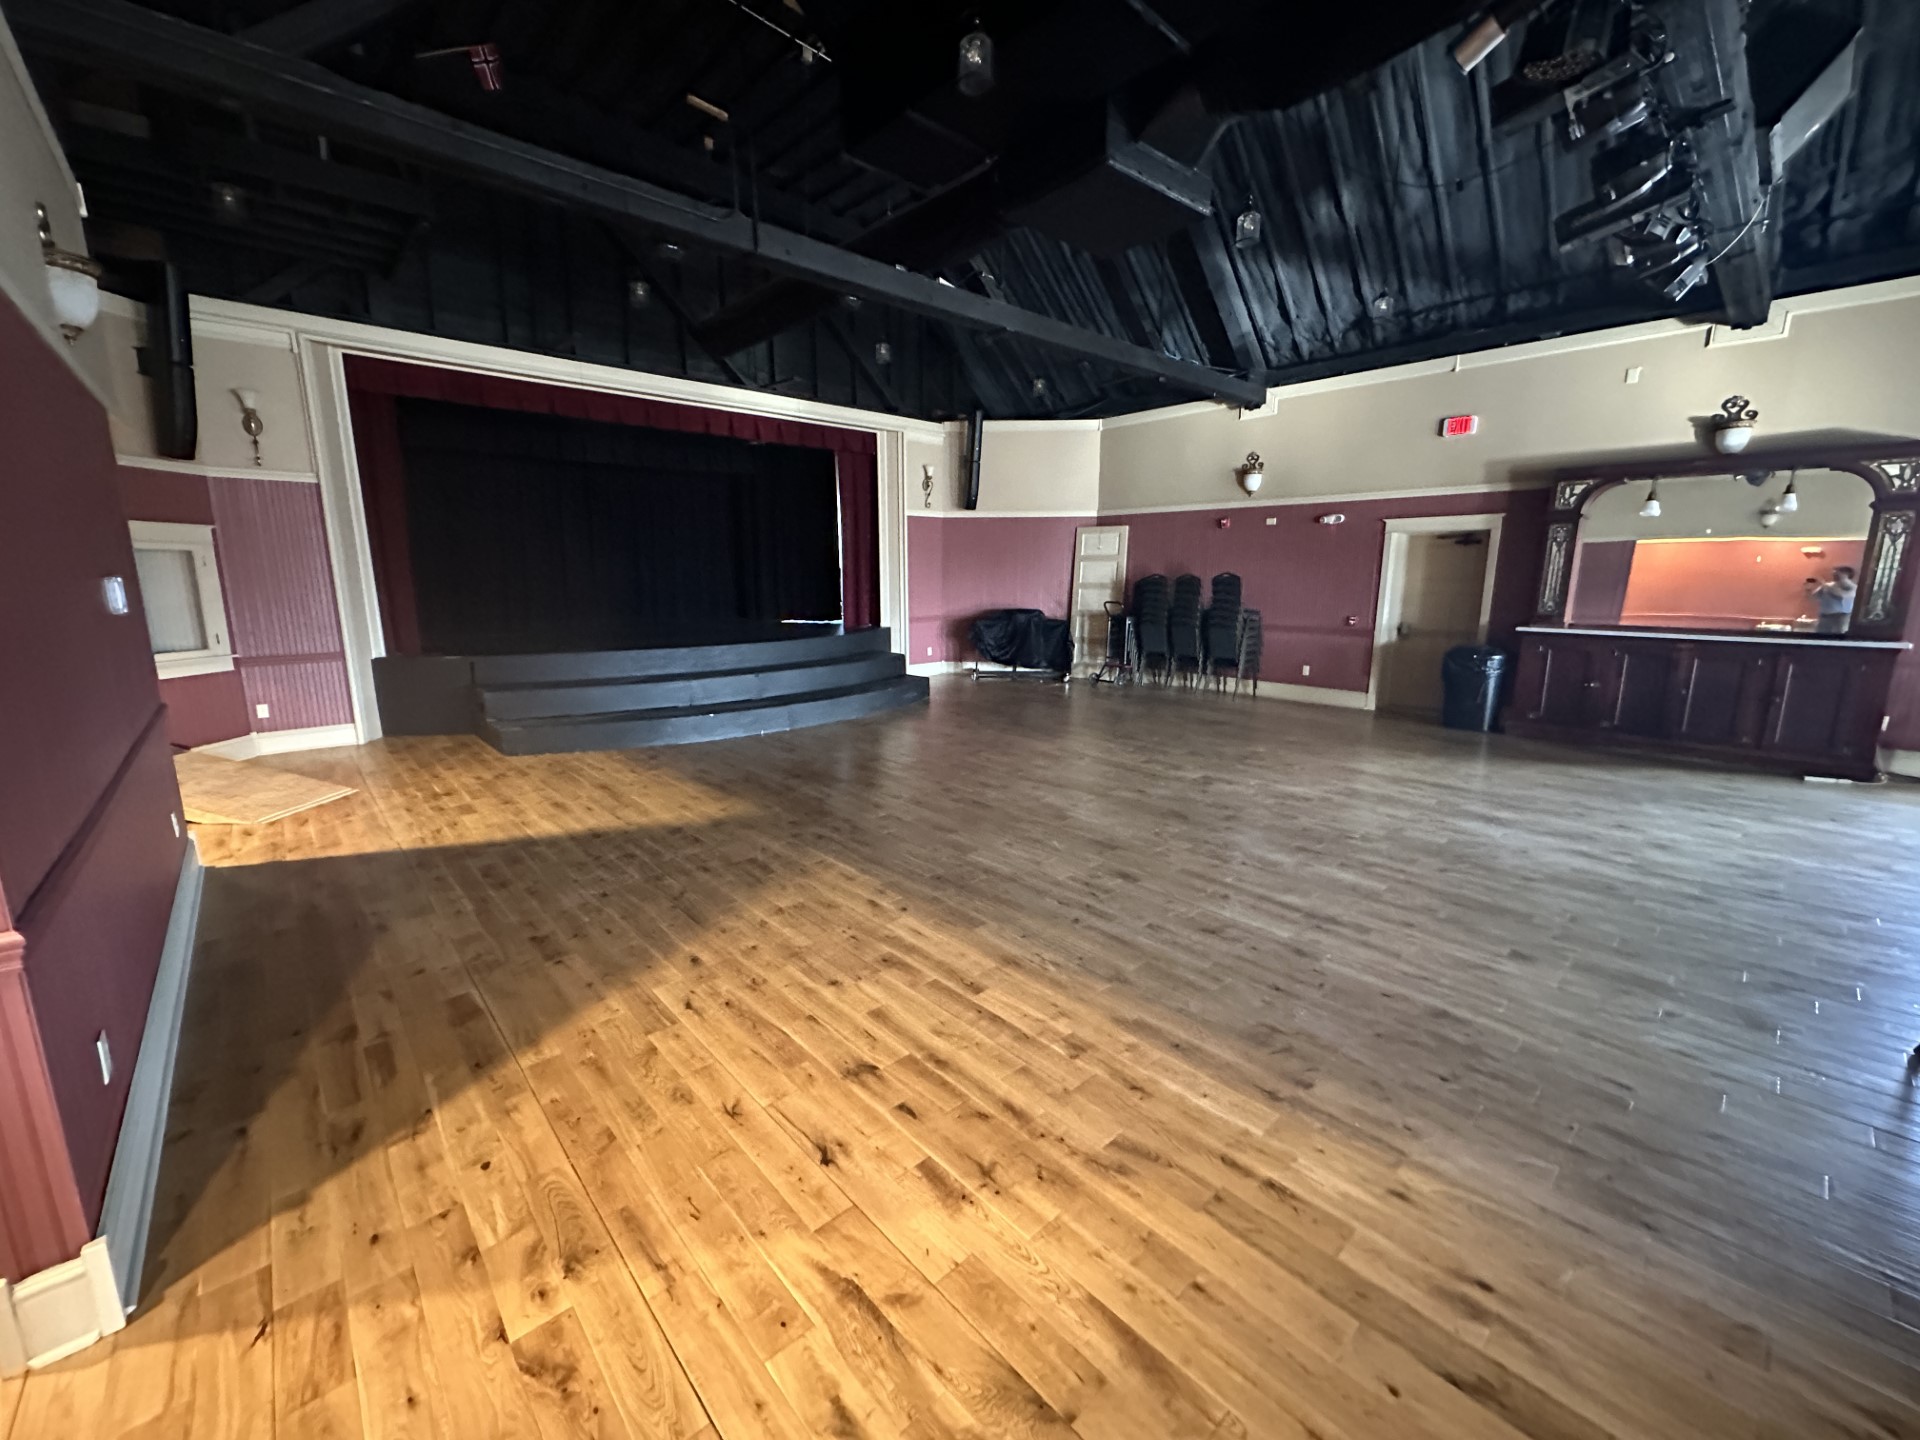 The Maddock Opera House is on the second floor and has a stage for performances and an open wood floor for seating